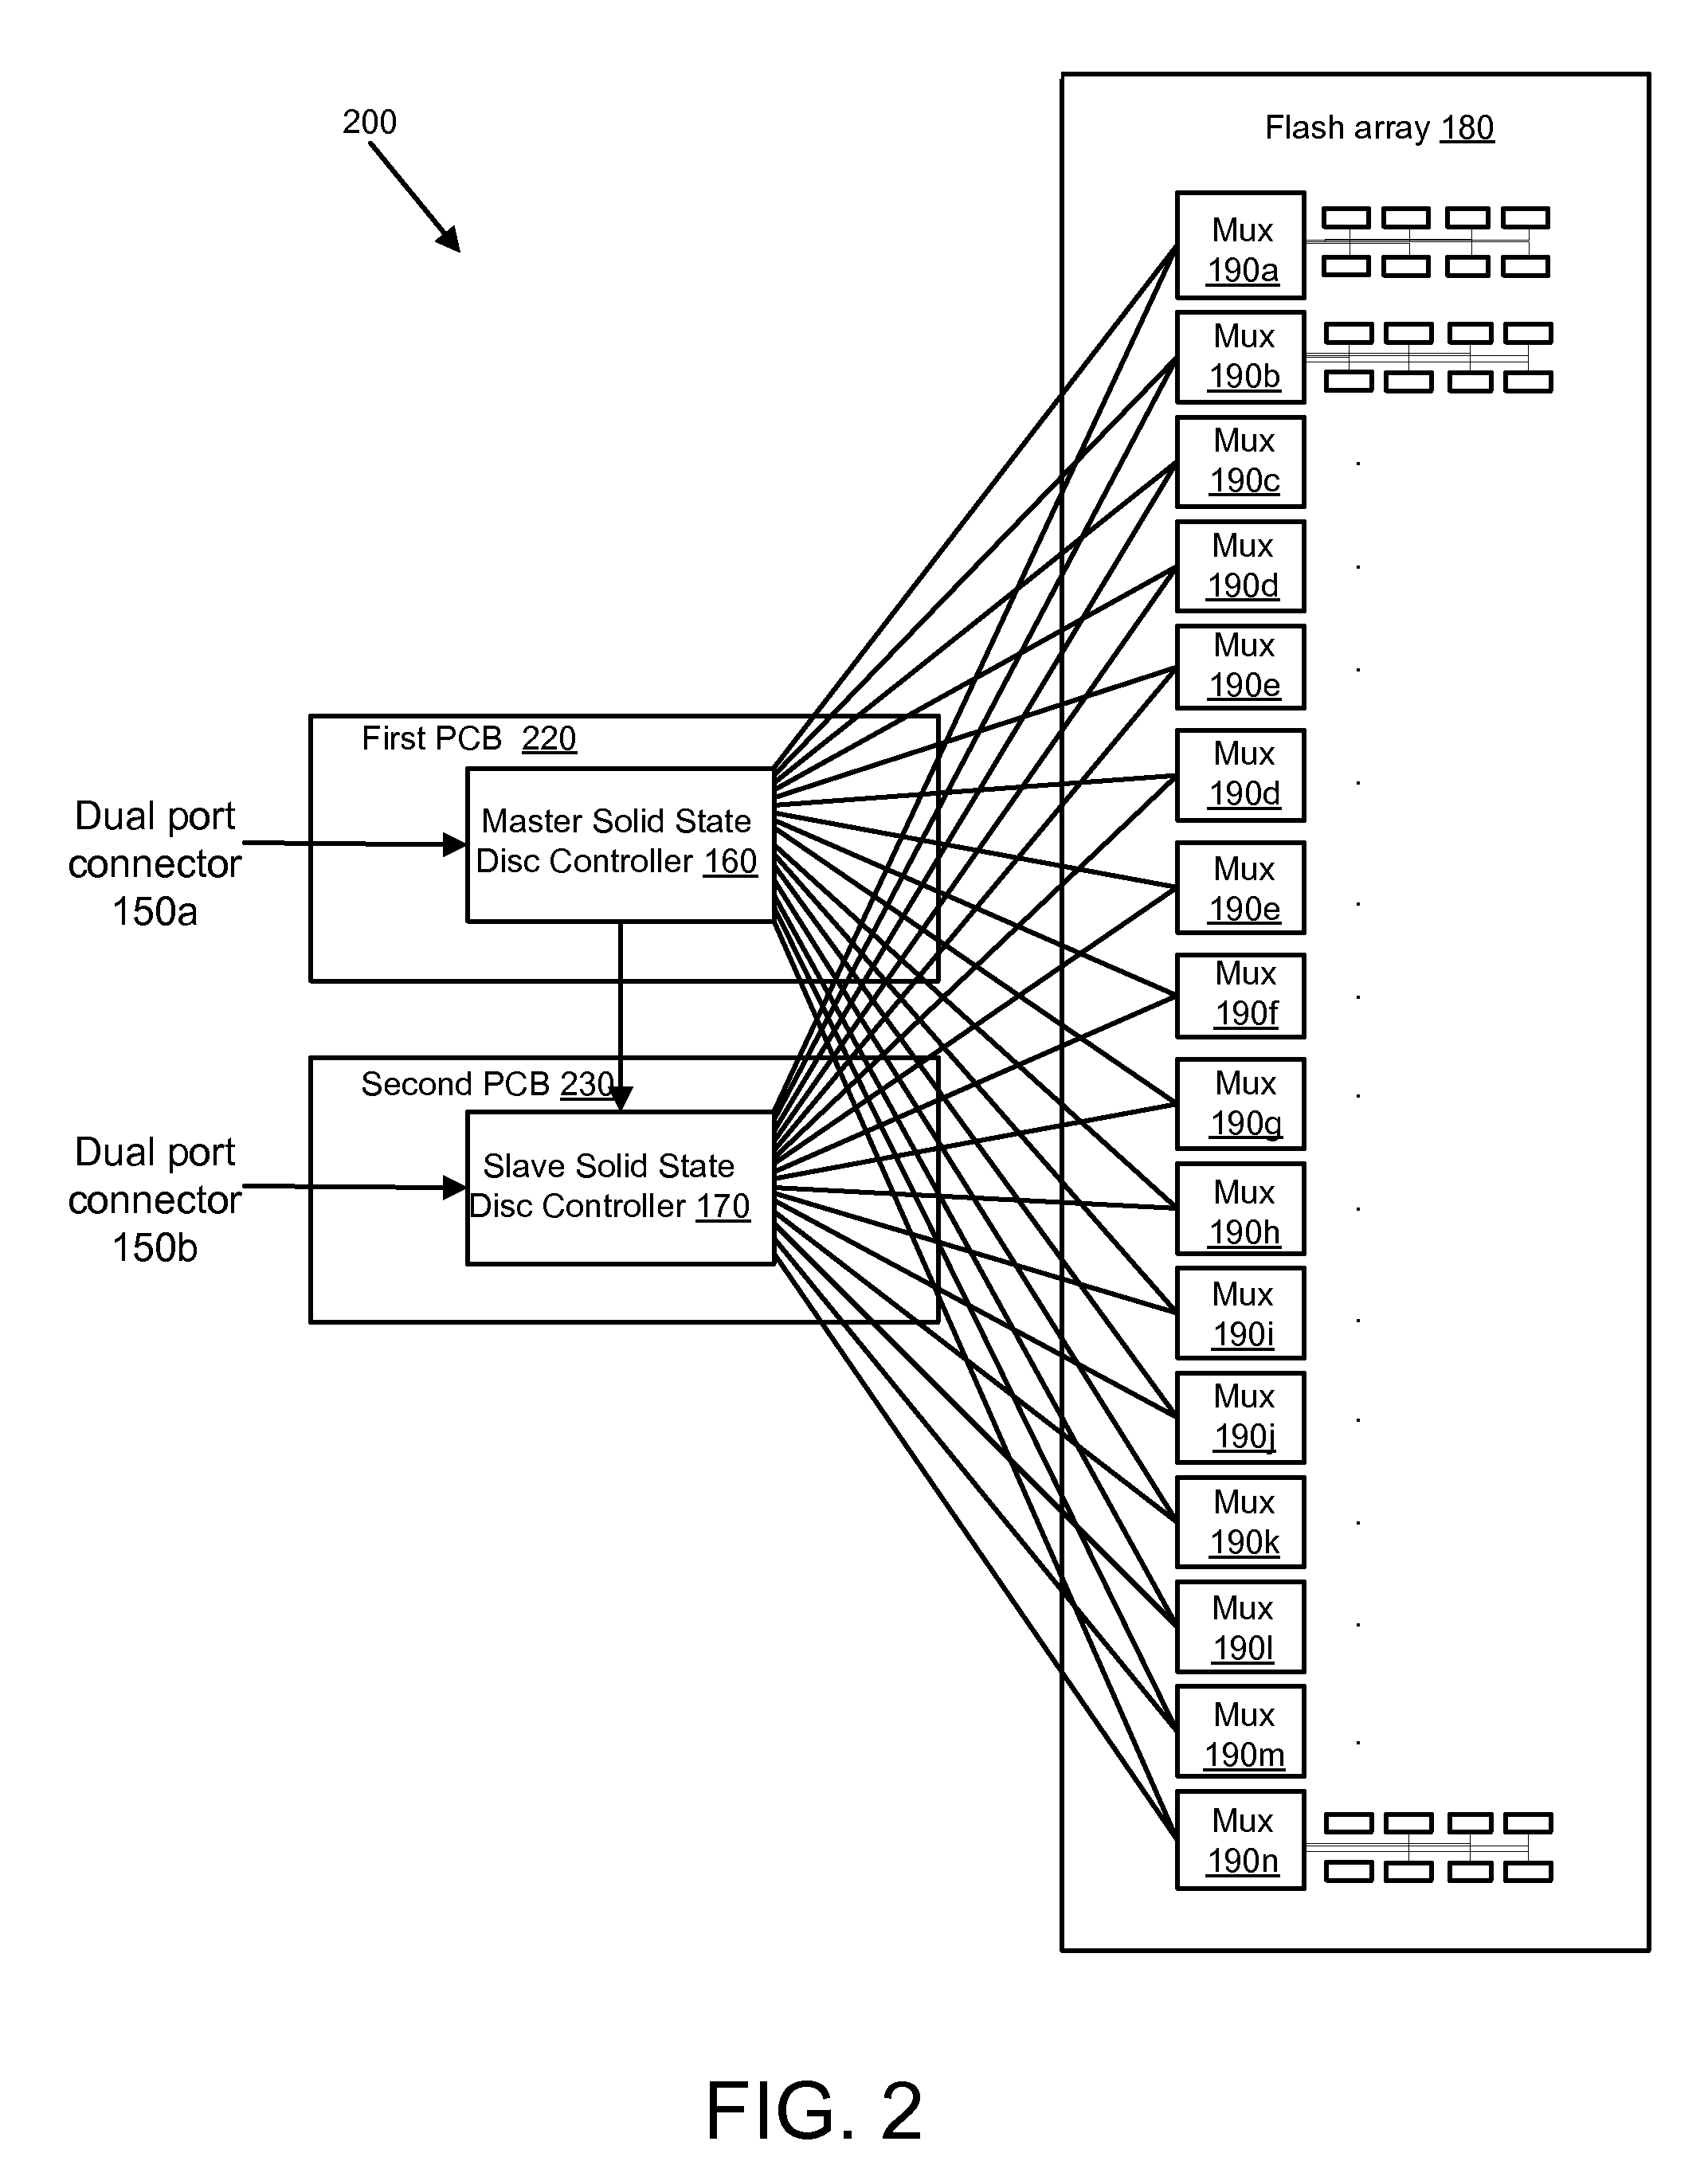 Method Apparatus and System for a Redundant and Fault Tolerant Solid State Disk